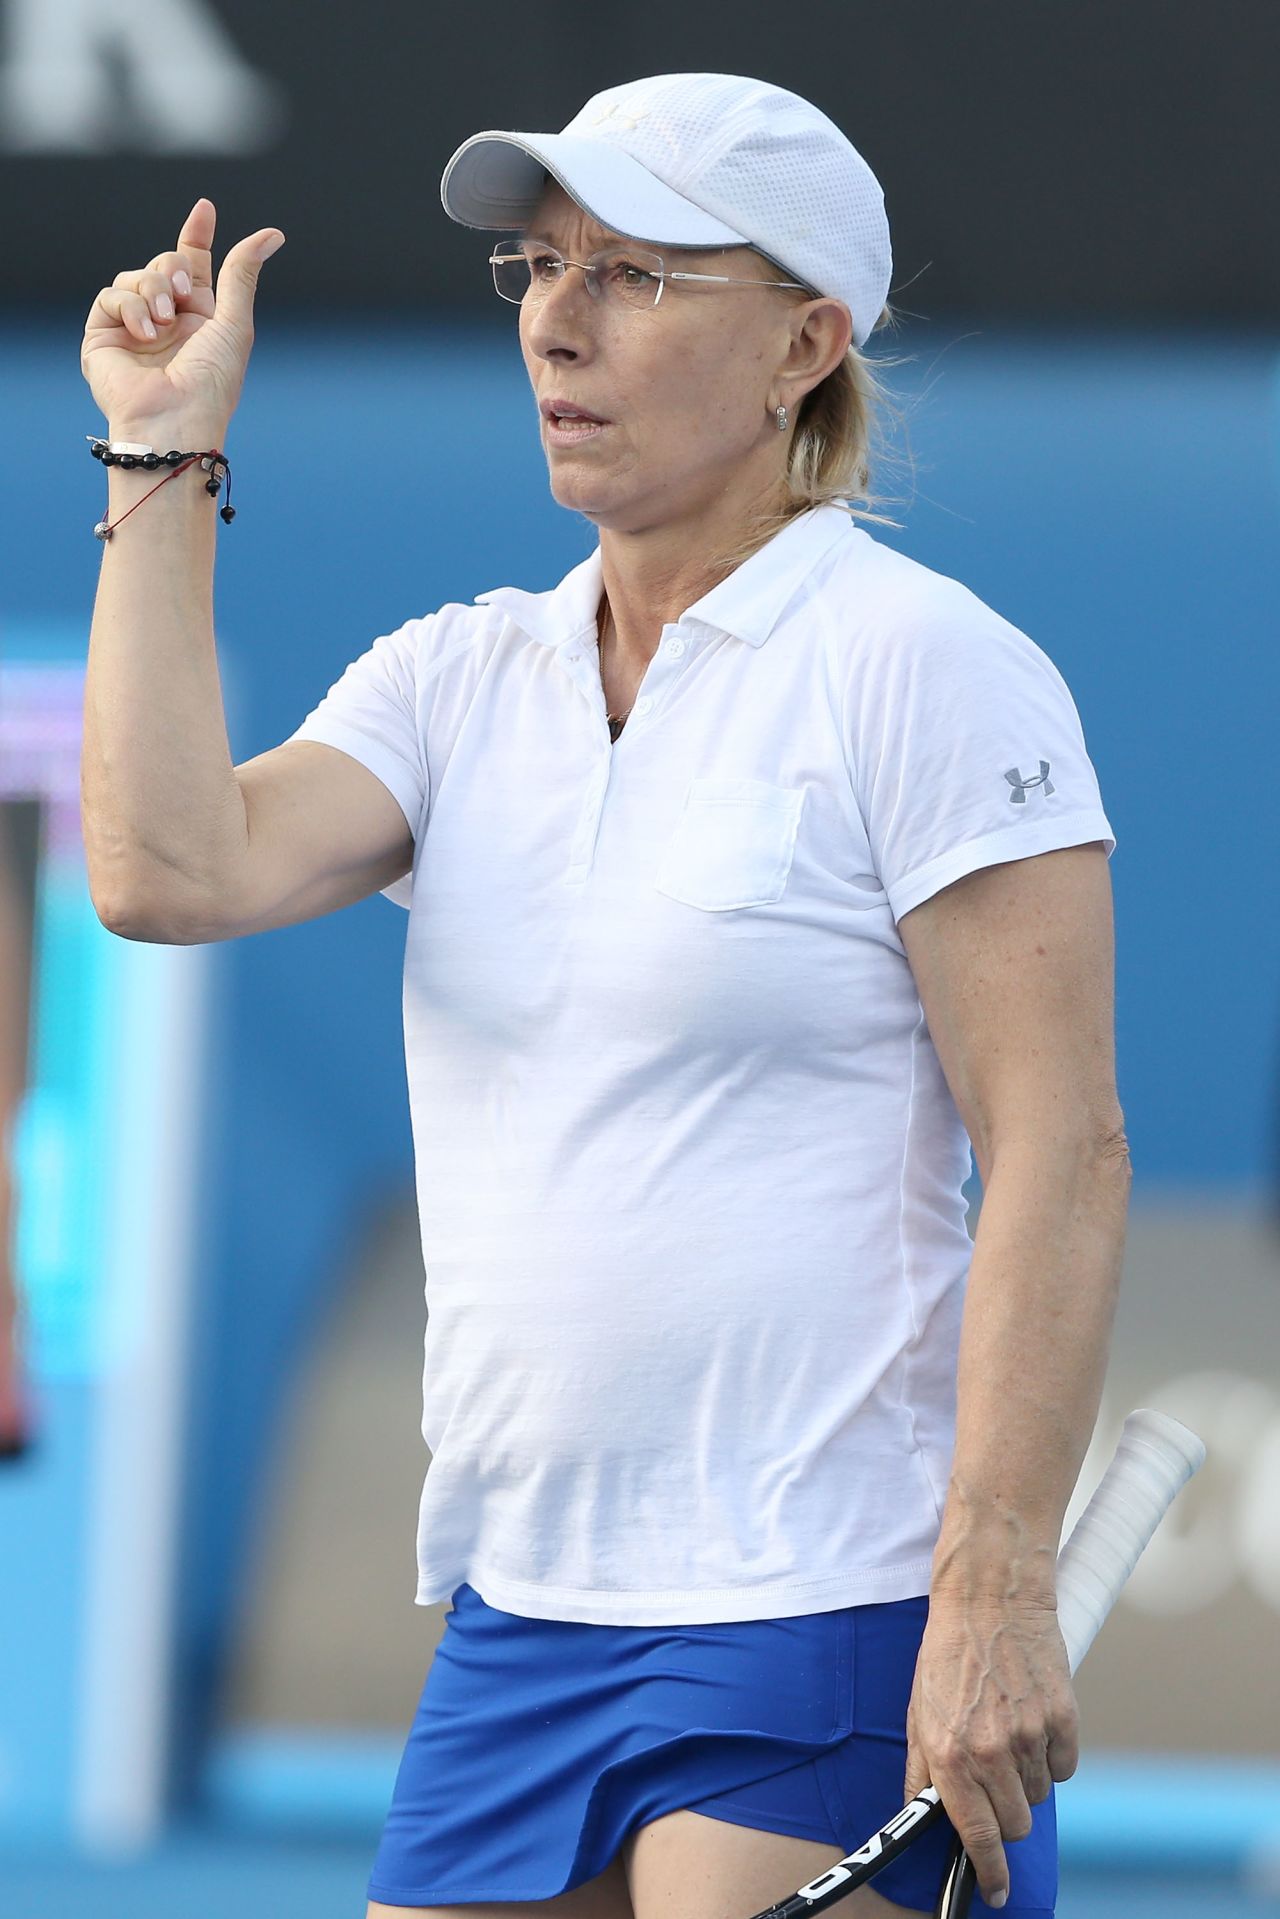 Navratilova, who holds the Open Era record for total singles and doubles titles in the men's and women's game, did not have the same success with Agnieszka Radwanska.